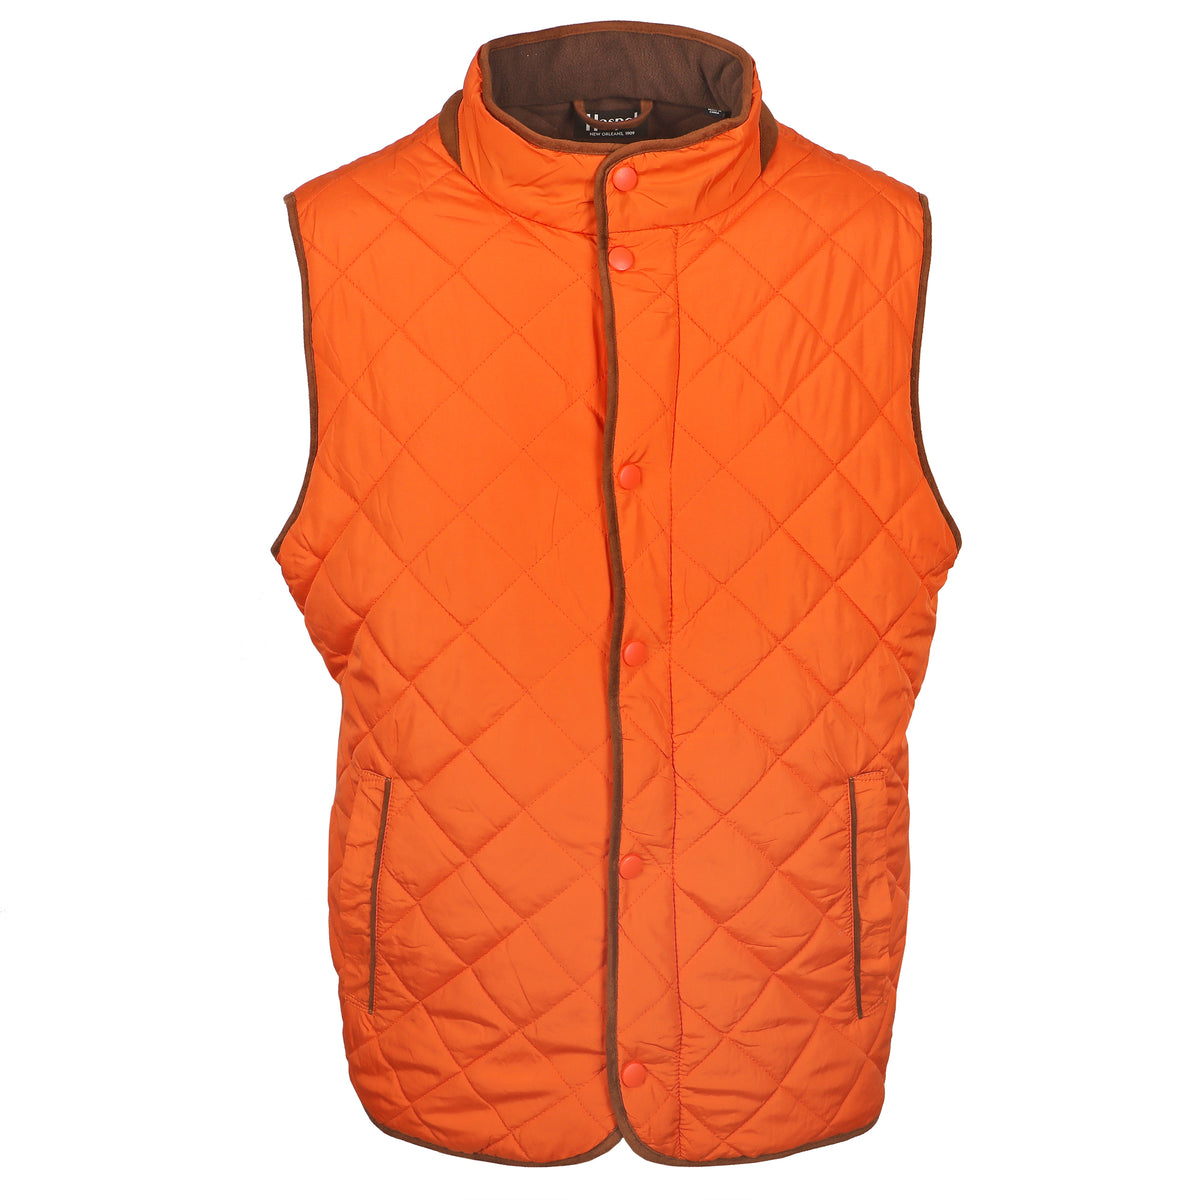 Saturday morning to Saturday night, The Sportsman was designed with interior pockets for all your gear. Get ready for sports and good times!   100% Polyester Vest  •  Quilted Shell &amp; Warm Fleece Interior  •  Full Front Zip with Snap Button Closure  •  Four Inside Pockets  •  Machine Wash - lay flat or hang to dry  •  Imported